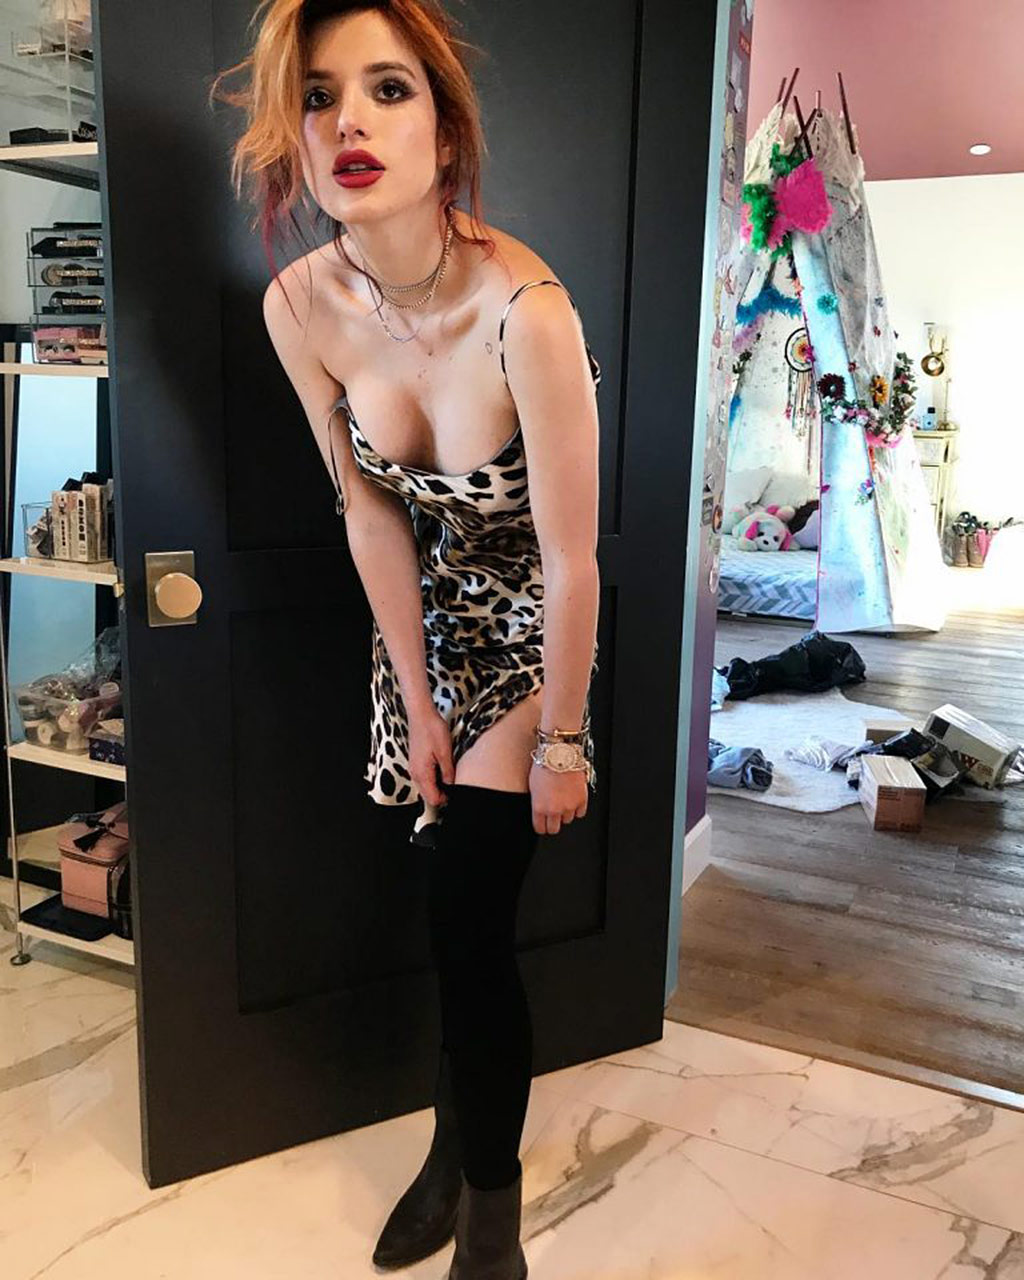 Ugly Lesbian Bella Thorne Completely Naked And Topless Pics